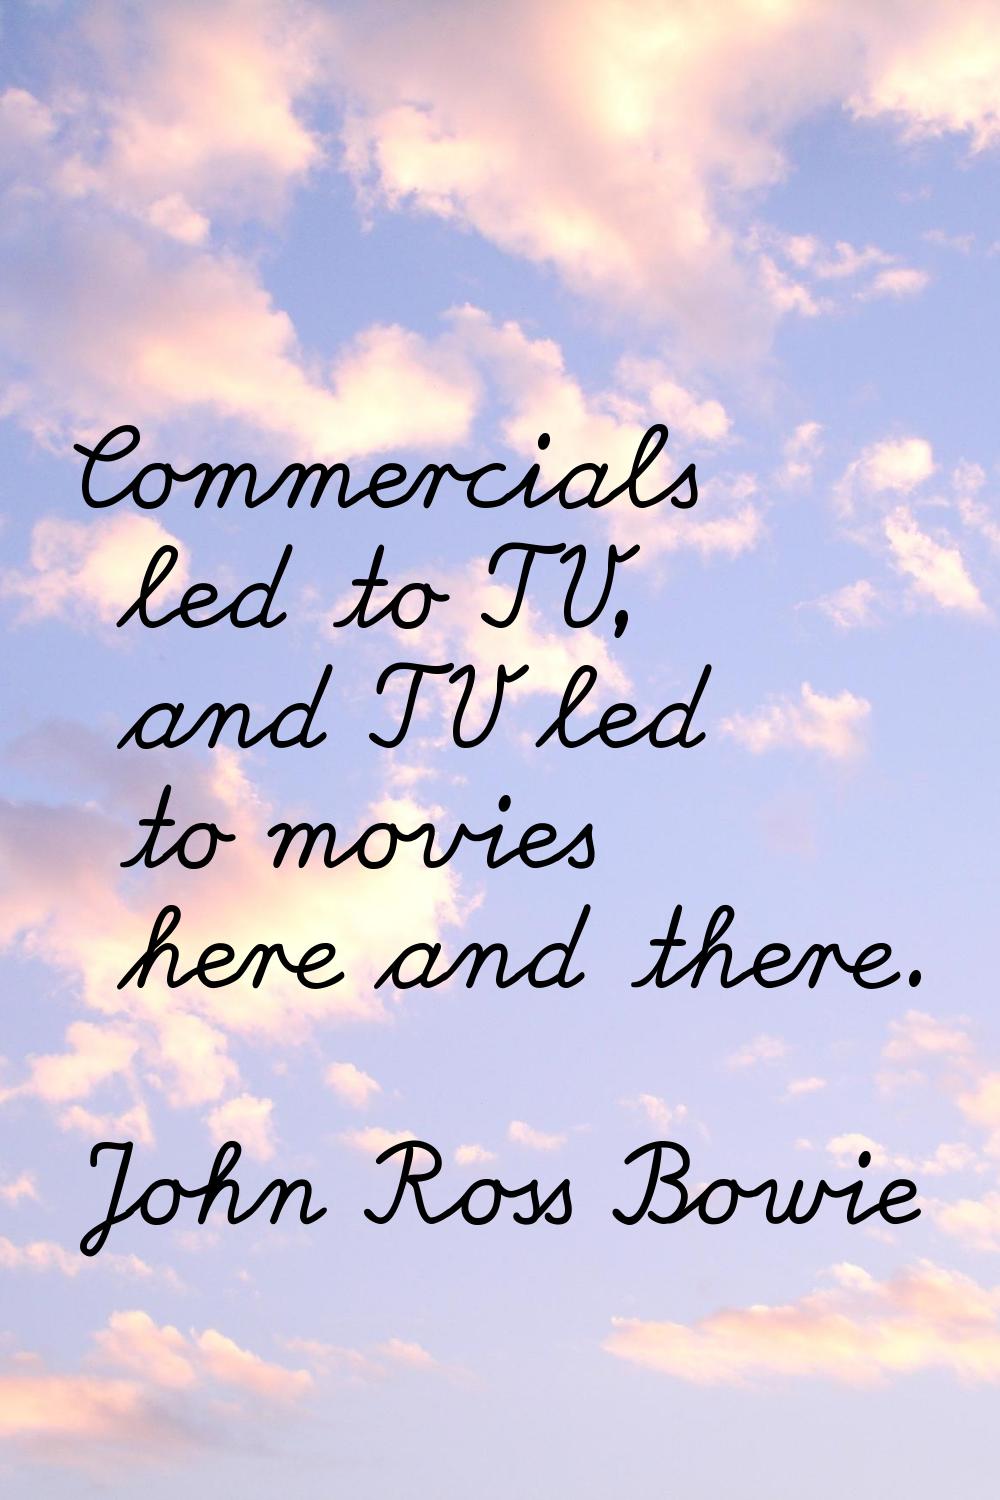 Commercials led to TV, and TV led to movies here and there.